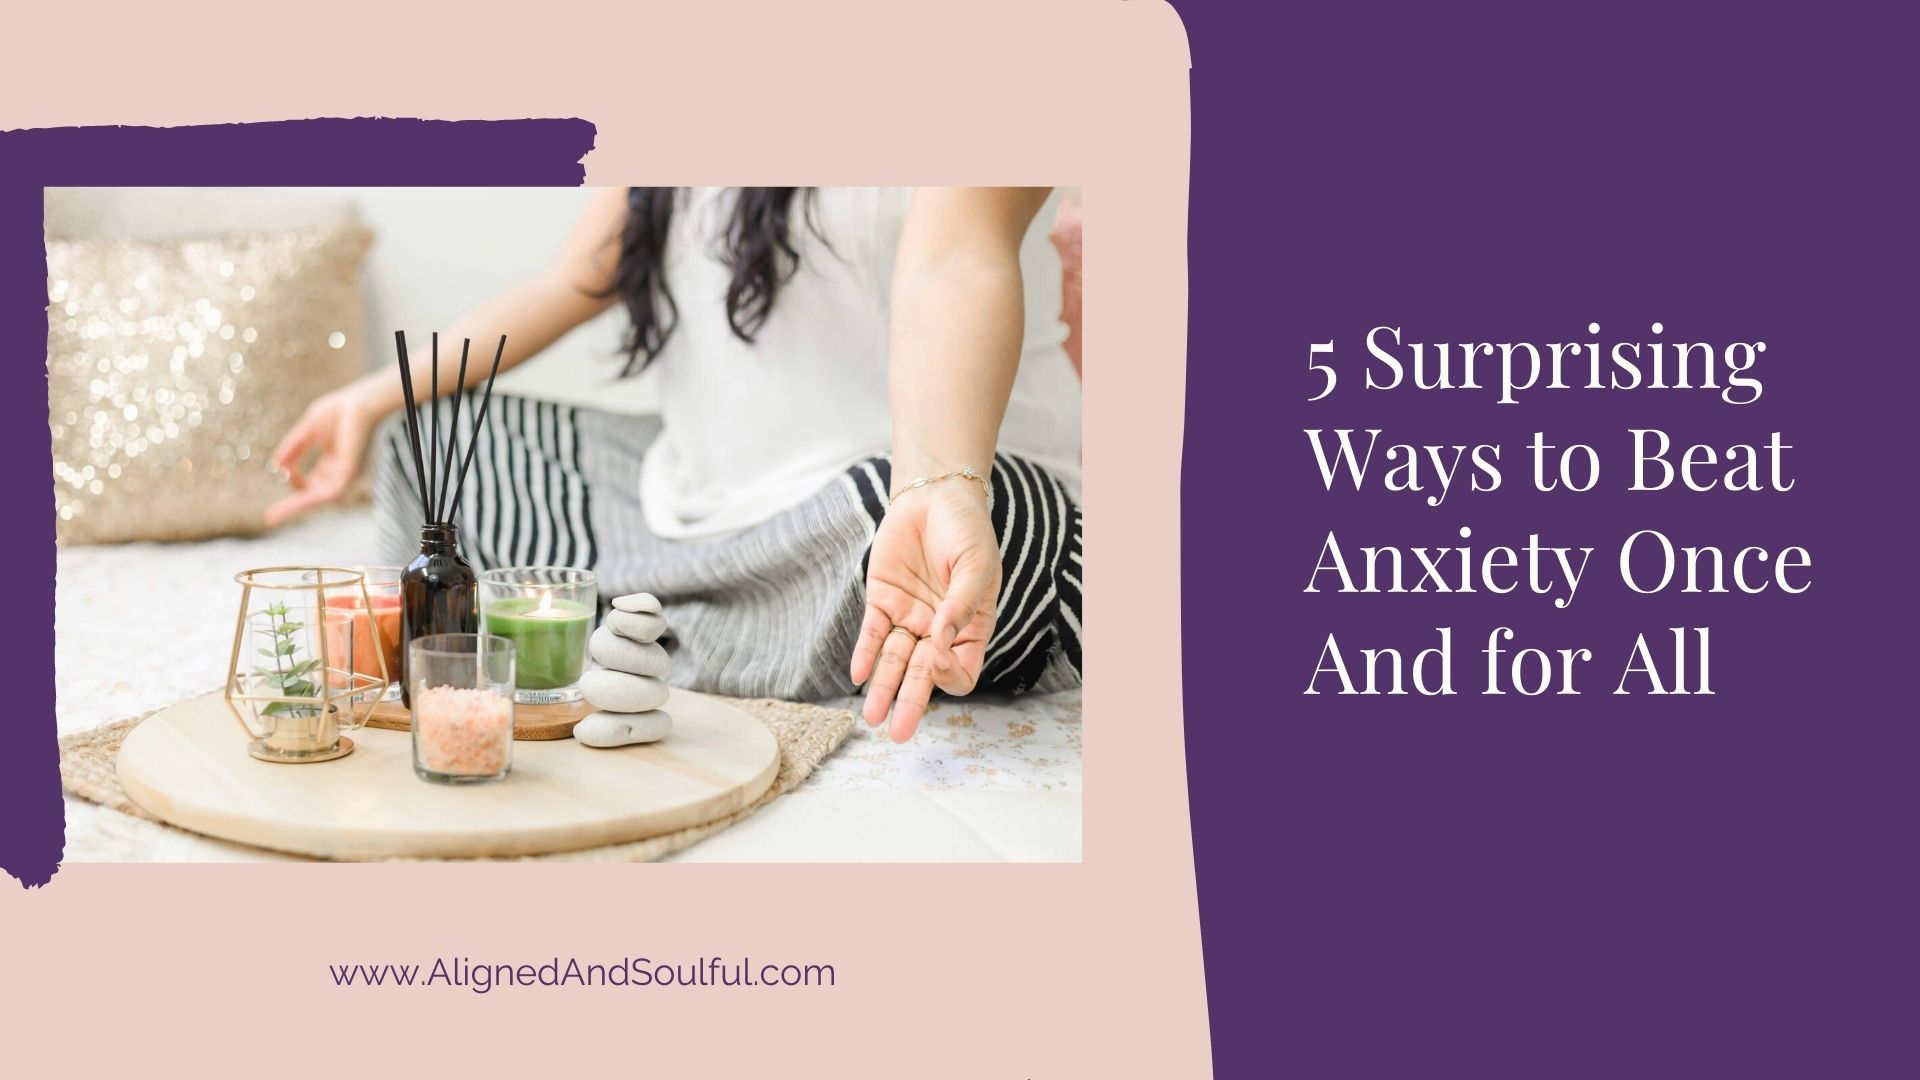 5 Surprising Ways to Beat Anxiety Once And for All